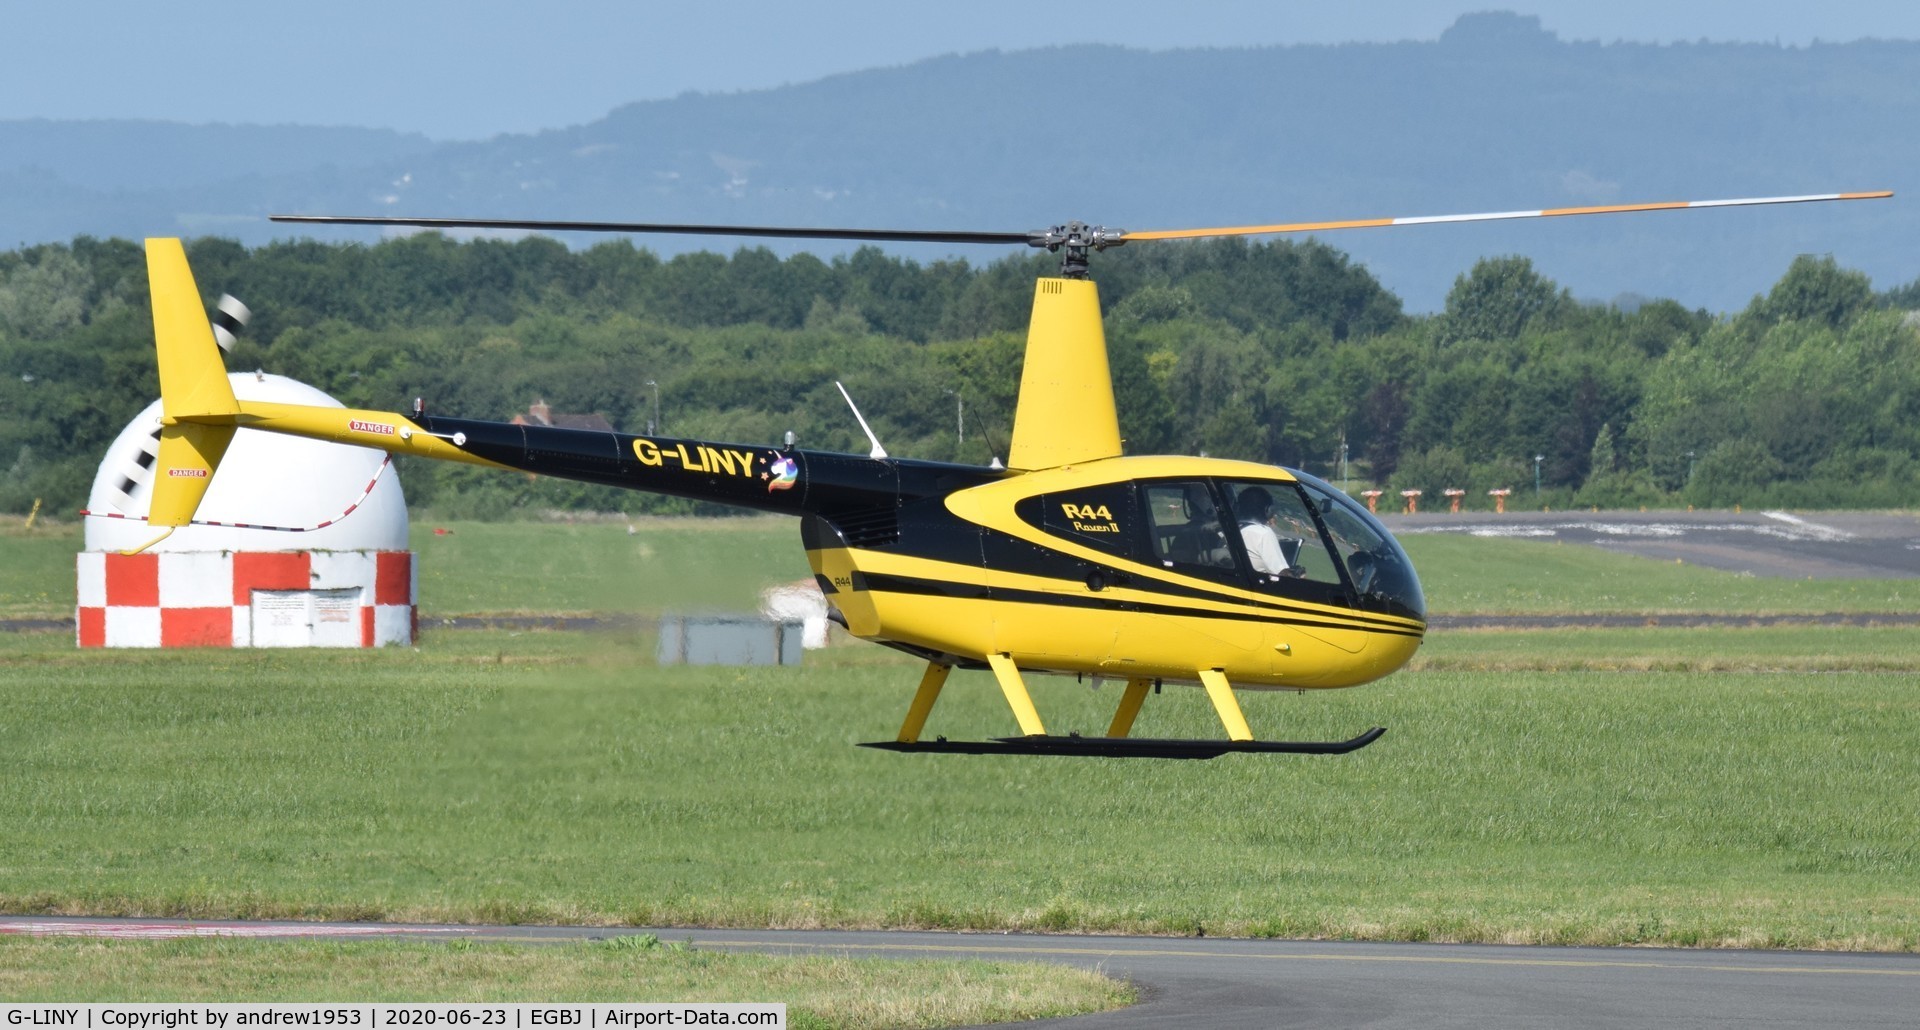 G-LINY, 2008 Robinson R44 Raven II C/N 12356, G-LINY taking off from Gloucestershire Airport.